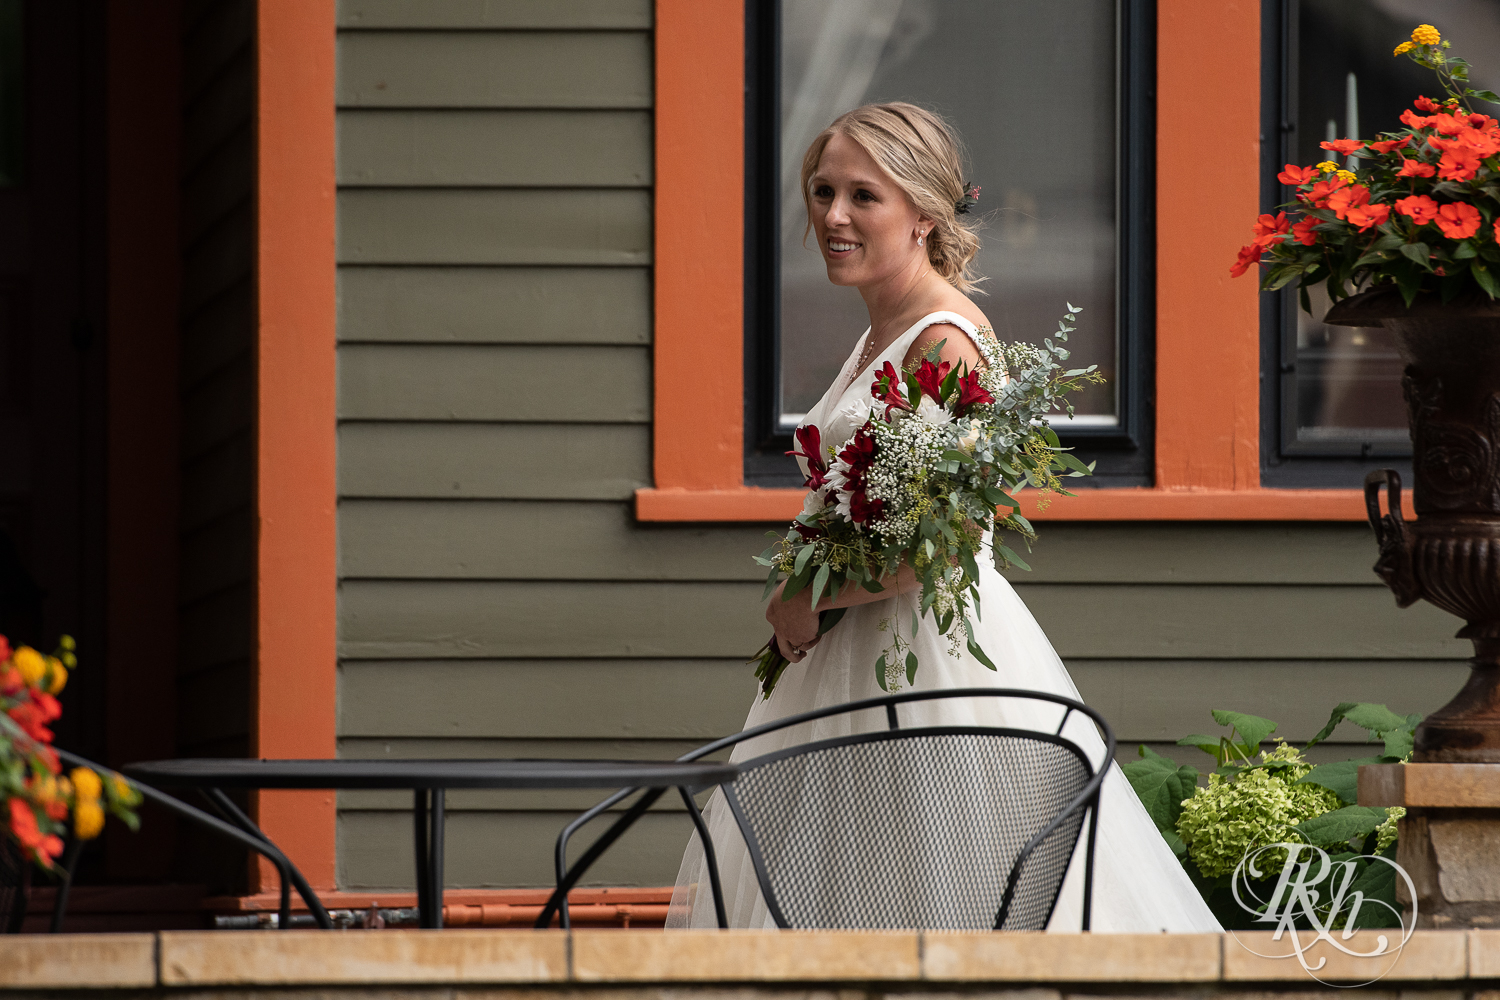 Bride walking down the aisle at the William Sauntry Mansion in Stillwater, Minnesota in the fall holding red and white flowers.